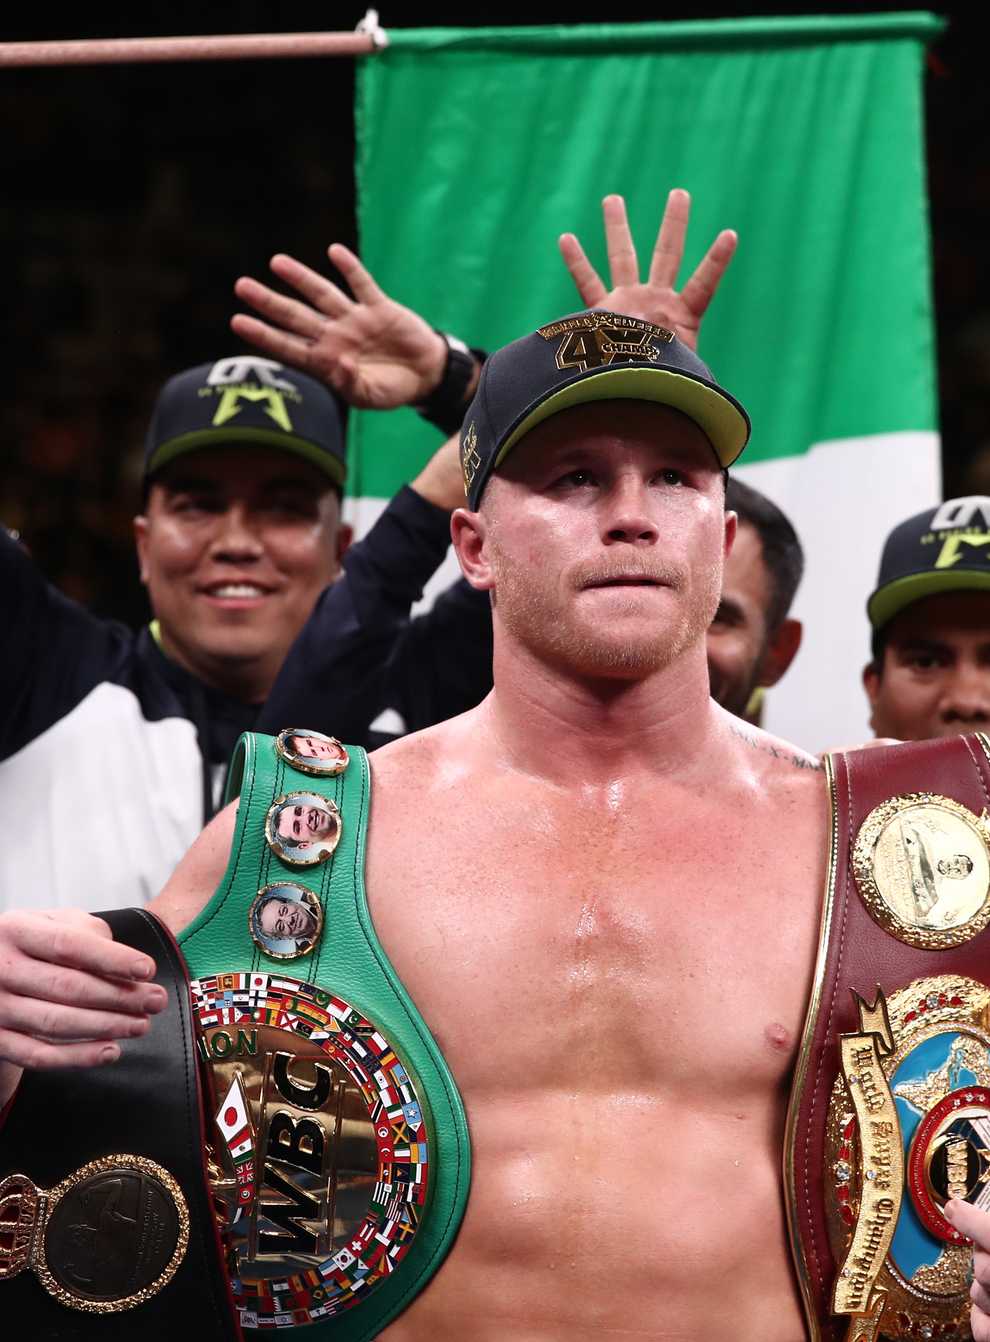 Canelo confirmed the lawsuit was filed as a result of 'failures' by his promoter and broadcaster